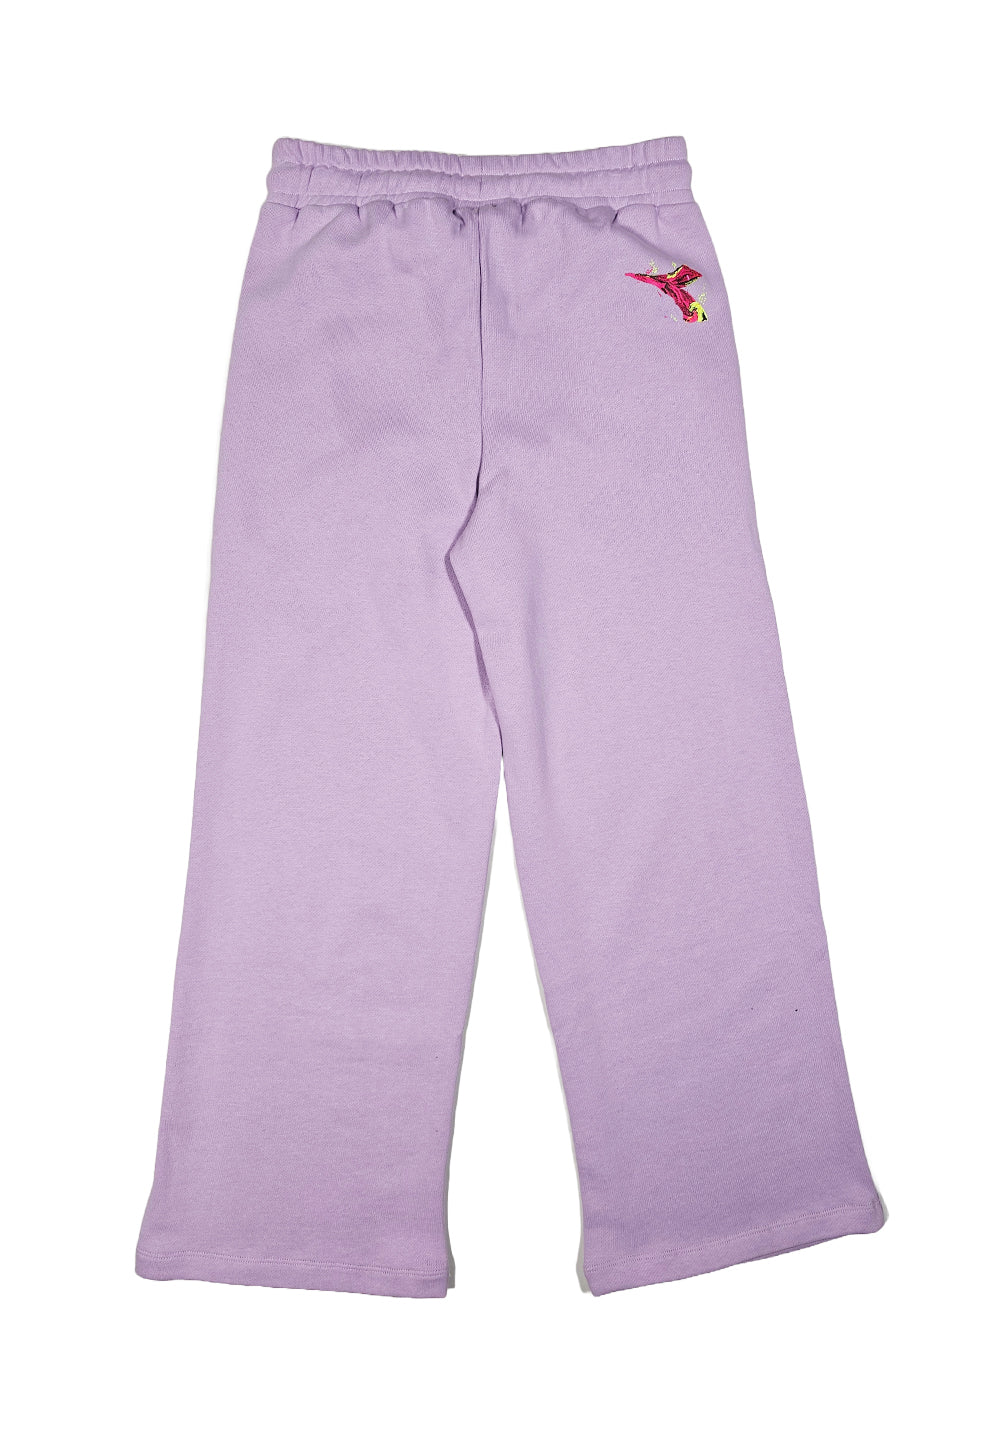 Lilac fleece trousers for girls